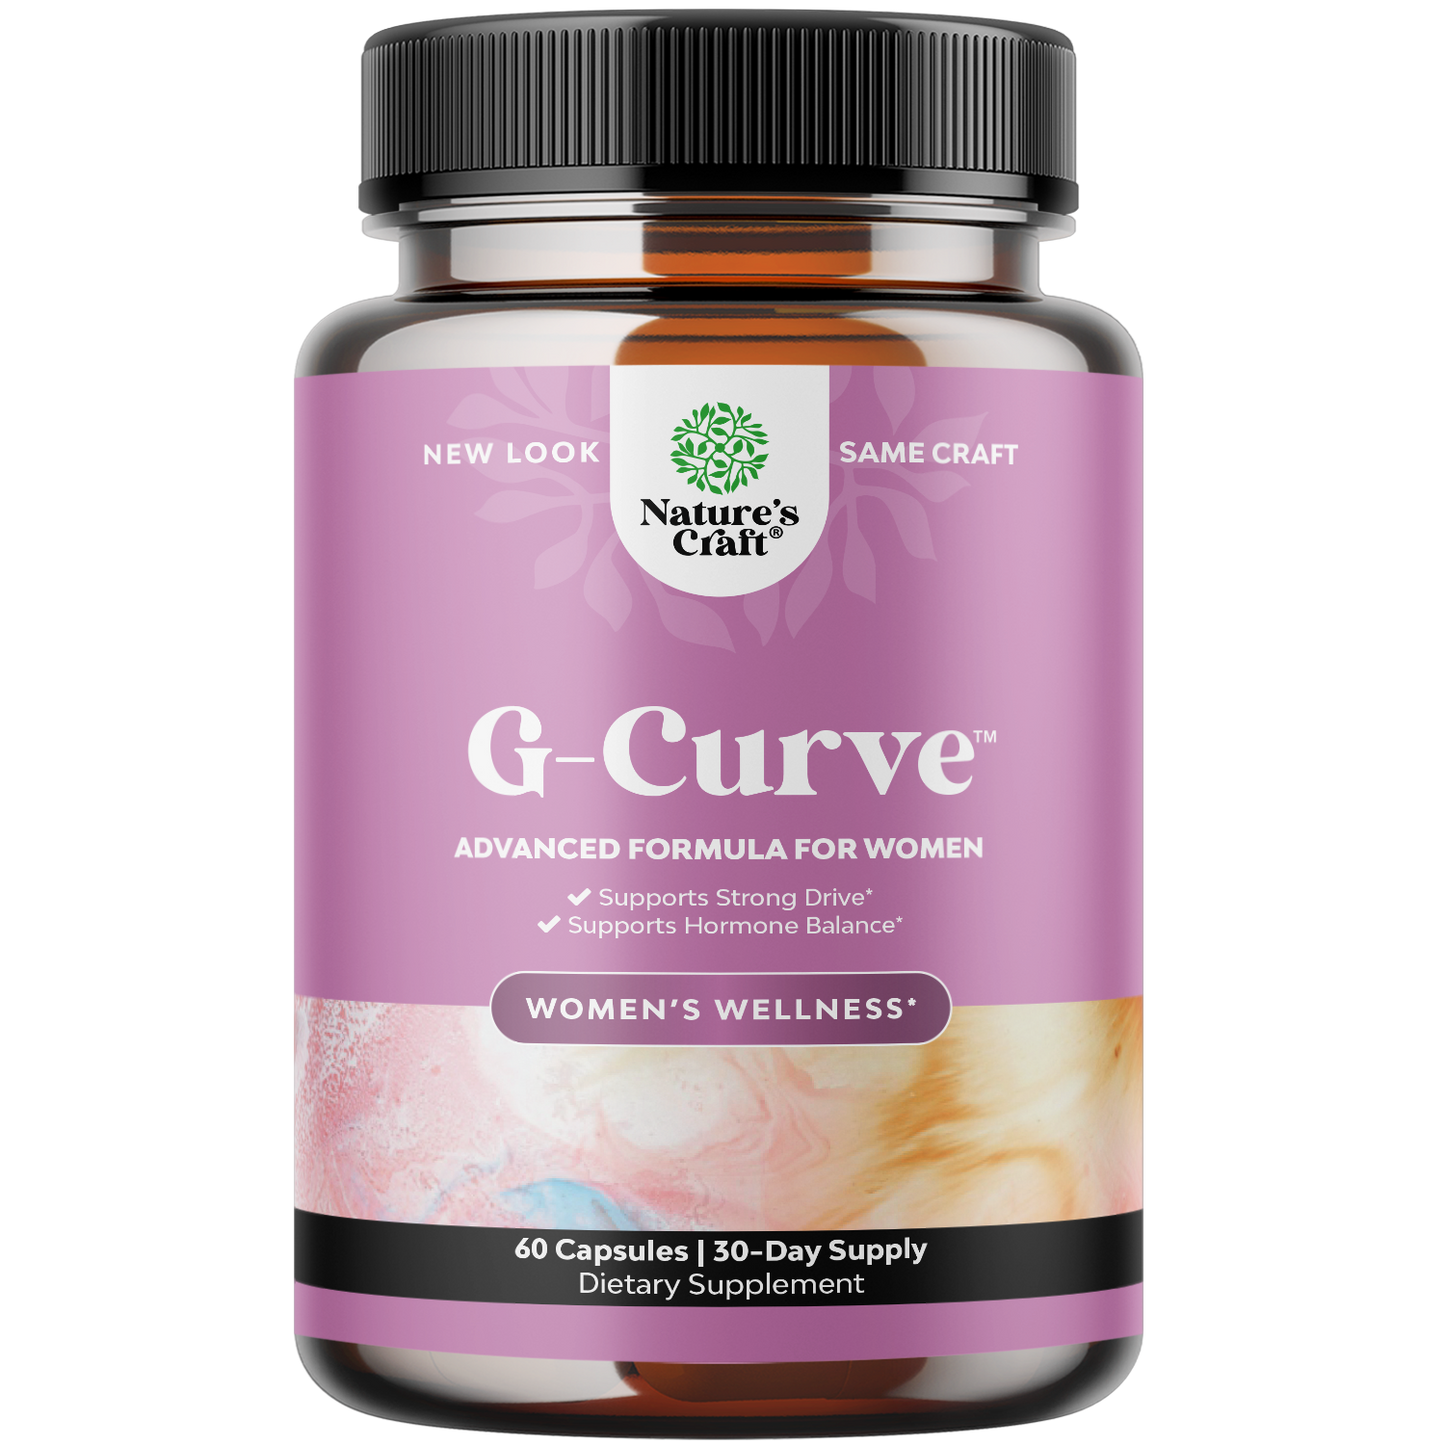 Forever Yang Organics on Instagram: What makes Curve Enhancing So  Effective? Clinically proven herbs to stimulate Mass & Muscle growth to  enhance feminine curves. ⌛️Curve Enhancing 🌹Shrink & Tighten Waist 🙌  Collagen